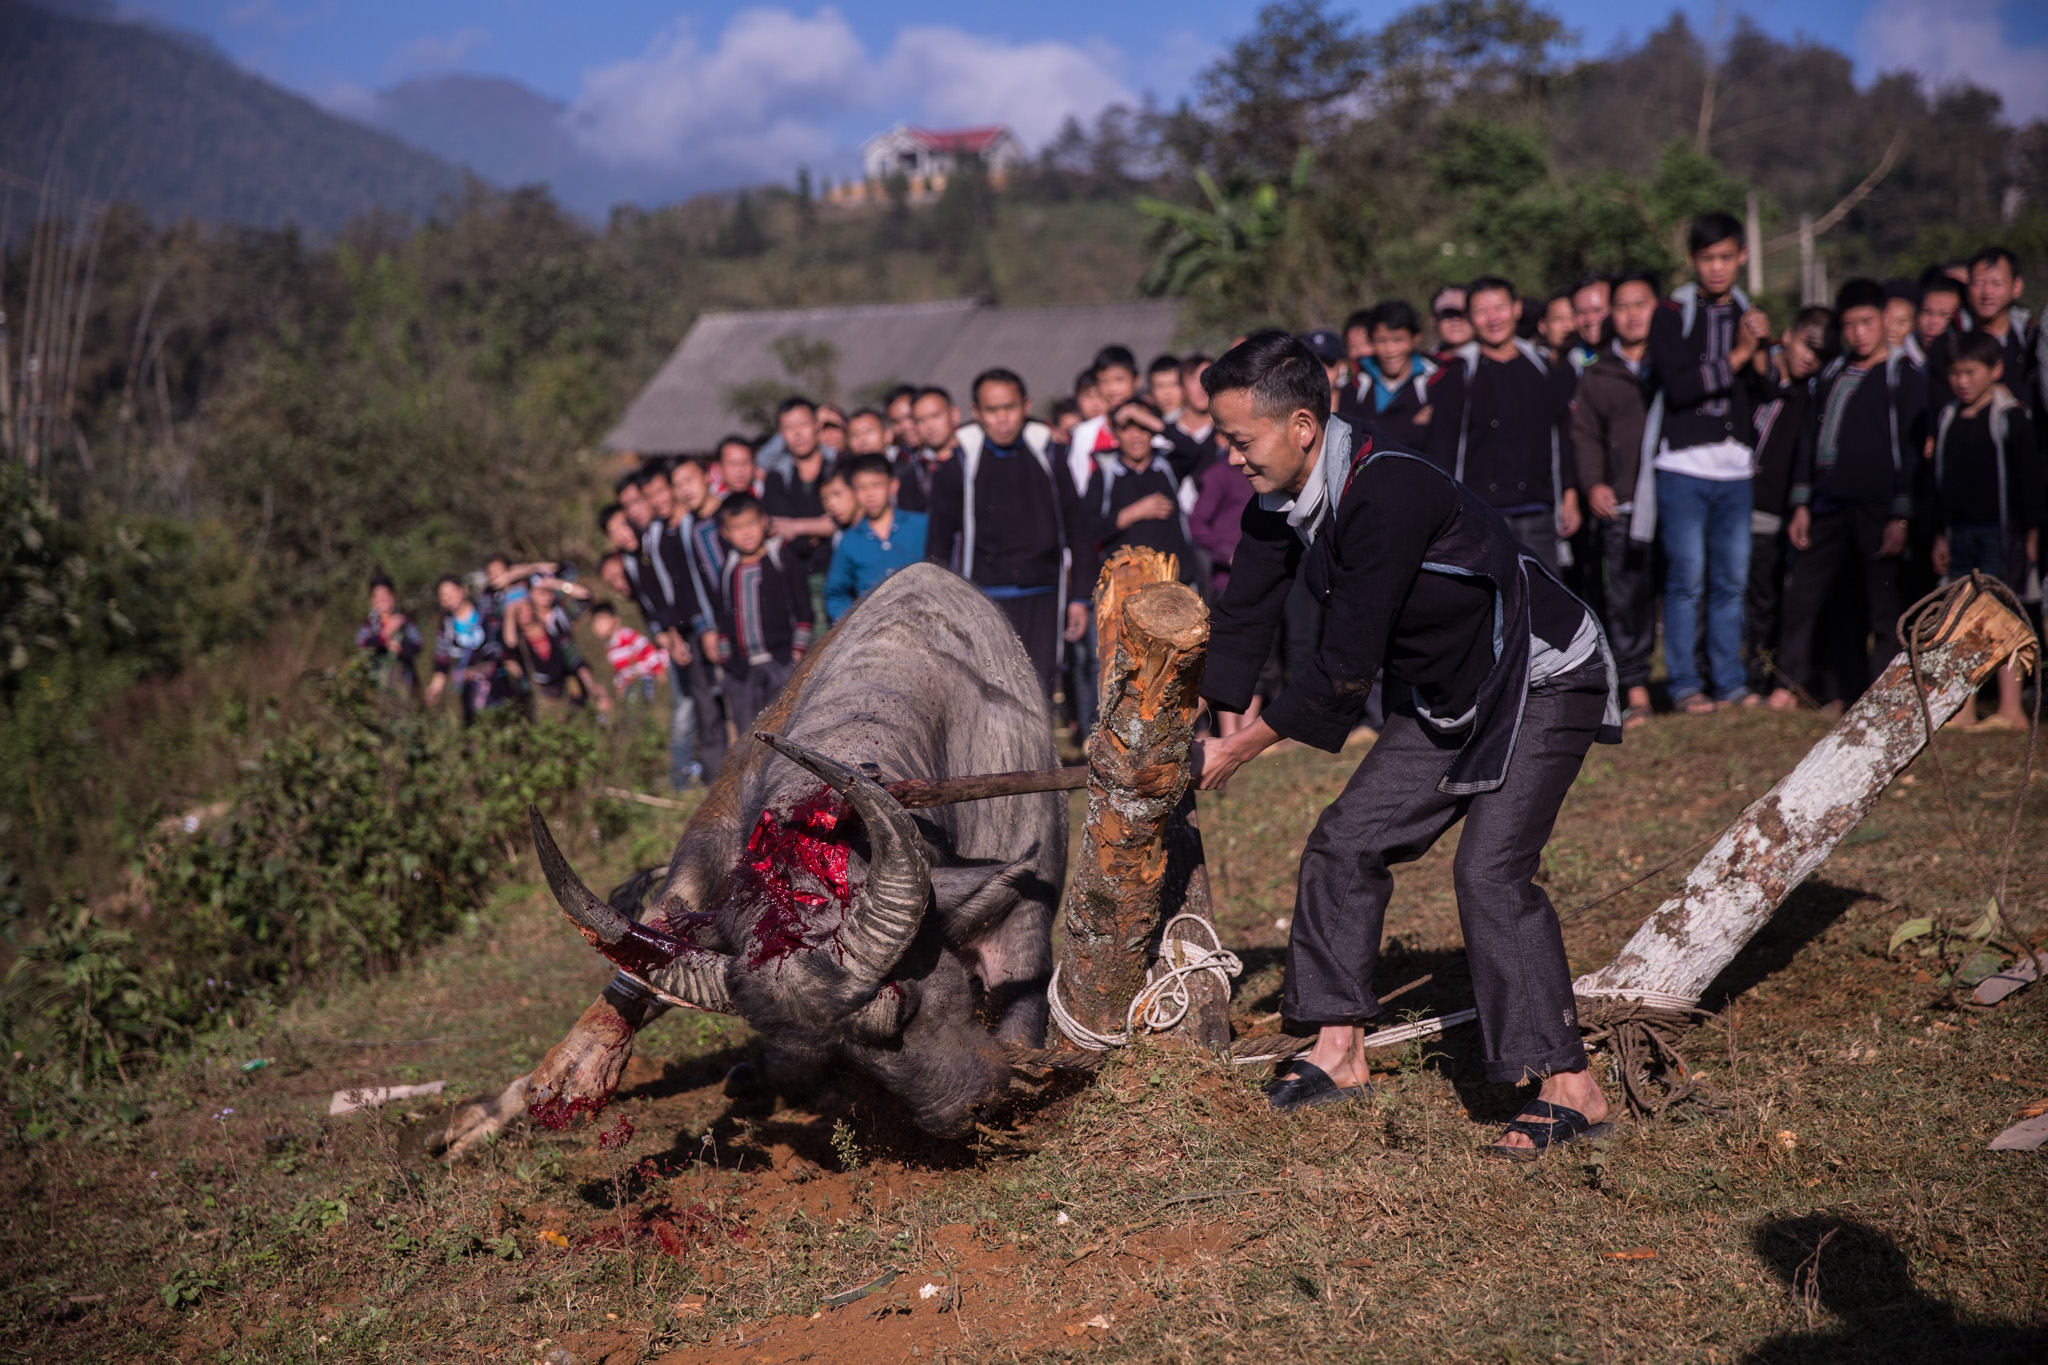 A buffalo is sacrificed as an offering to the spirit of the deceased, under the gaze of the members of the community.